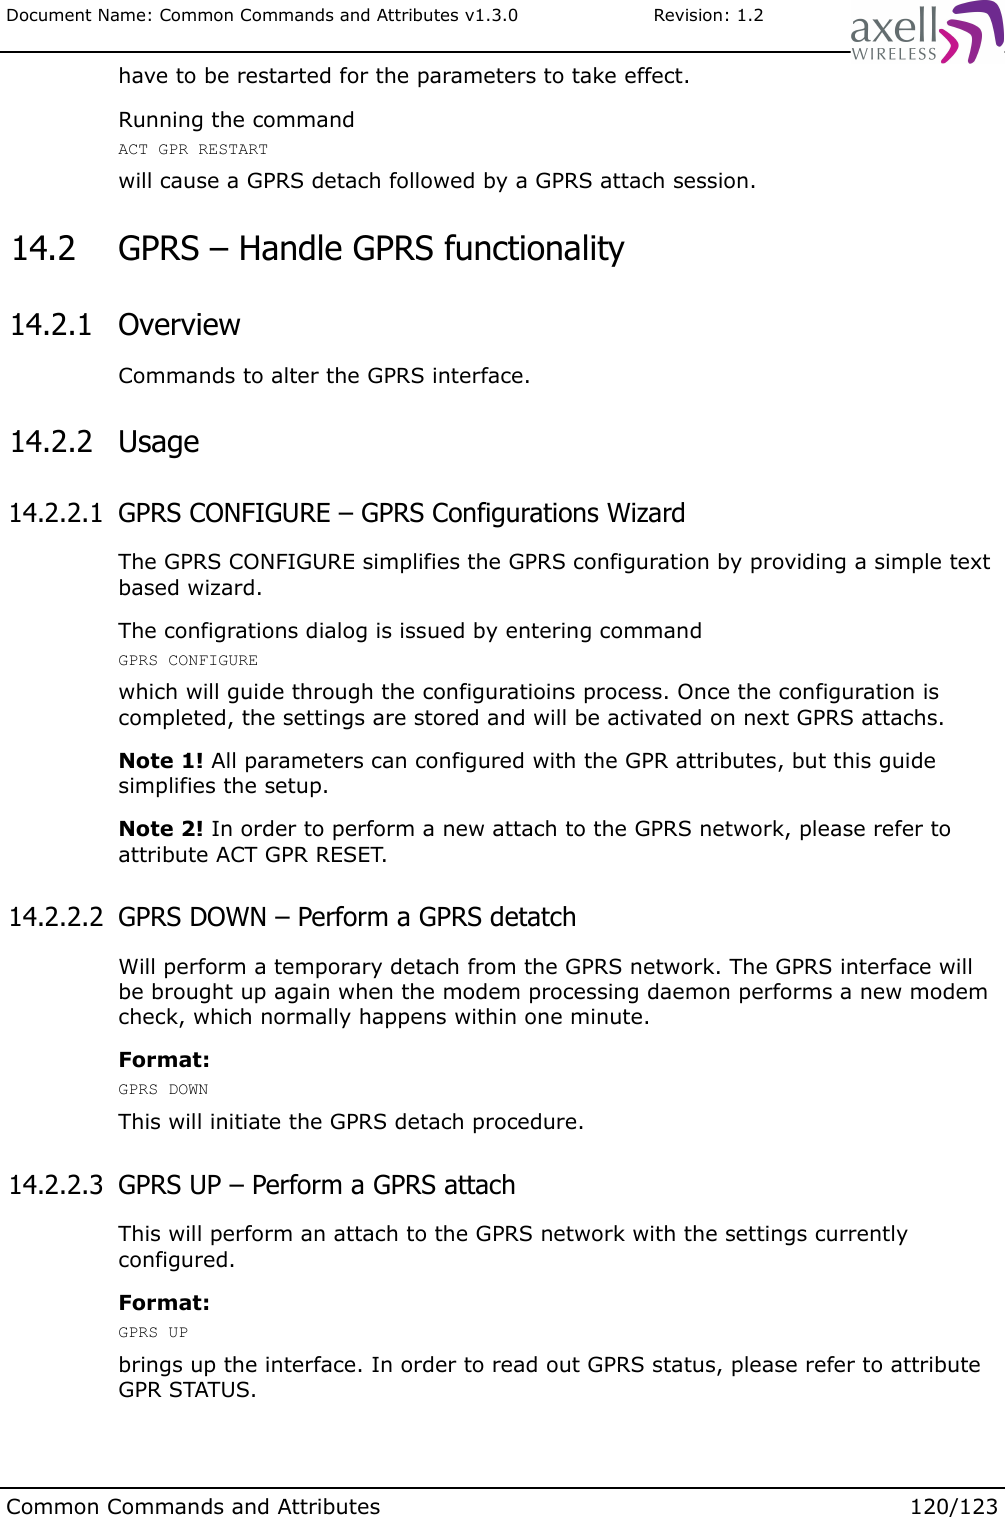 Document Name: Common Commands and Attributes v1.3.0                       Revision: 1.2have to be restarted for the parameters to take effect.Running the commandACT GPR RESTARTwill cause a GPRS detach followed by a GPRS attach session. 14.2  GPRS – Handle GPRS functionality 14.2.1  OverviewCommands to alter the GPRS interface. 14.2.2  Usage 14.2.2.1  GPRS CONFIGURE – GPRS Configurations WizardThe GPRS CONFIGURE simplifies the GPRS configuration by providing a simple text based wizard.The configrations dialog is issued by entering command GPRS CONFIGUREwhich will guide through the configuratioins process. Once the configuration is completed, the settings are stored and will be activated on next GPRS attachs.Note 1! All parameters can configured with the GPR attributes, but this guide simplifies the setup.Note 2! In order to perform a new attach to the GPRS network, please refer to attribute ACT GPR RESET. 14.2.2.2  GPRS DOWN – Perform a GPRS detatchWill perform a temporary detach from the GPRS network. The GPRS interface will be brought up again when the modem processing daemon performs a new modem check, which normally happens within one minute.Format:GPRS DOWNThis will initiate the GPRS detach procedure. 14.2.2.3  GPRS UP – Perform a GPRS attach This will perform an attach to the GPRS network with the settings currently configured.Format:GPRS UPbrings up the interface. In order to read out GPRS status, please refer to attribute GPR STATUS.Common Commands and Attributes 120/123